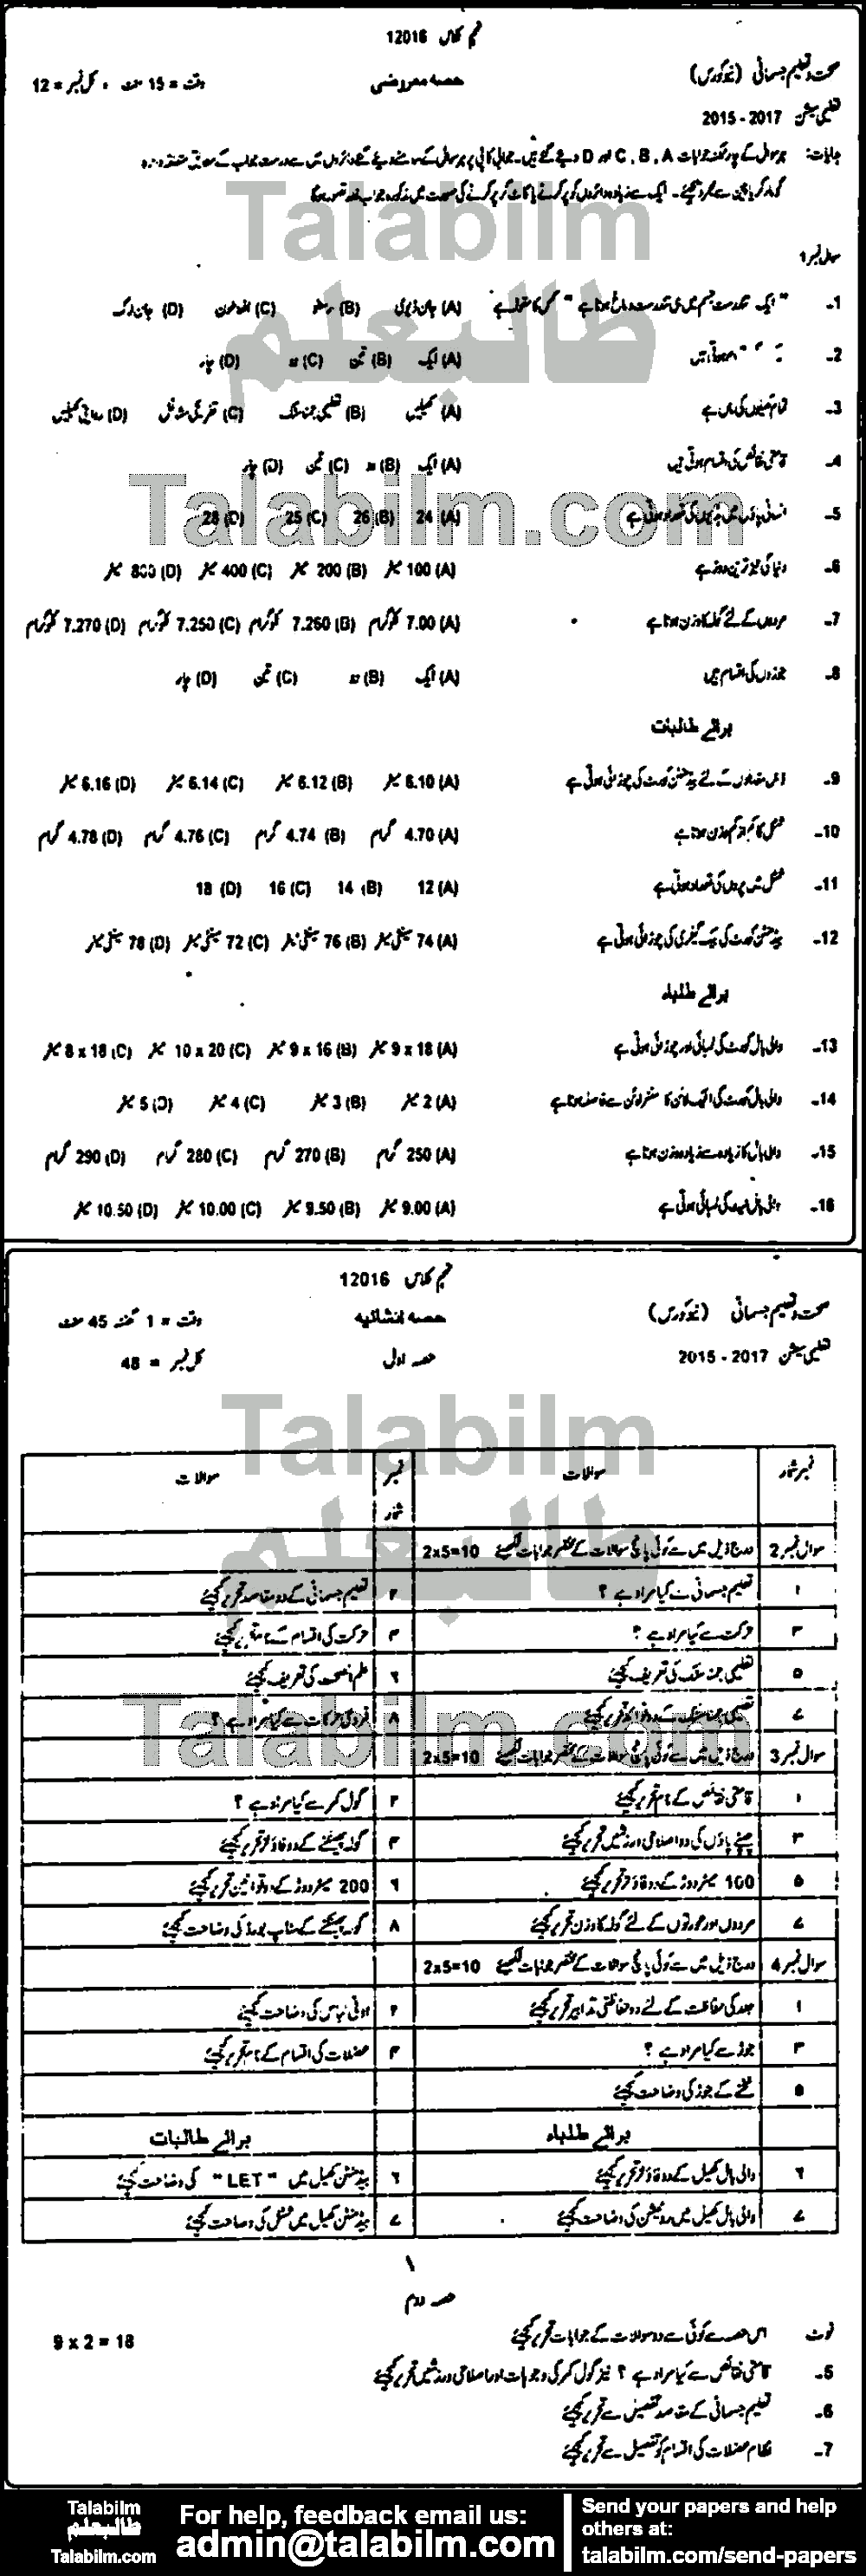 Health And Physical Education 0 past paper for Urdu Medium 2016 Group-I